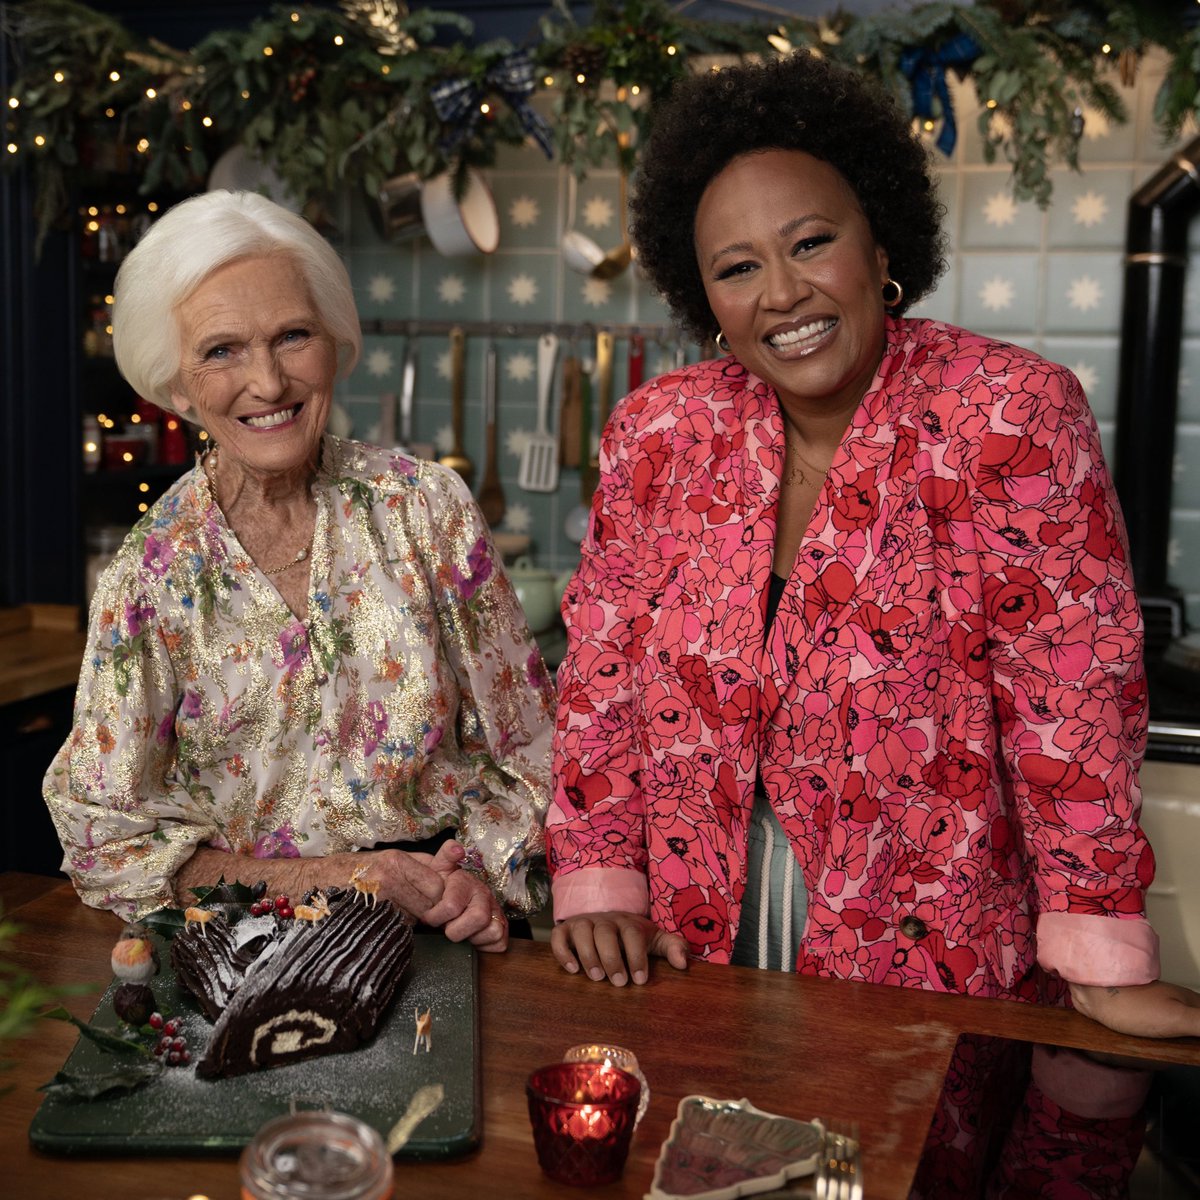 I was so delighted to be part of Mary Berry’s Highland Christmas! The episode will air this Wednesday at 9pm on @BBCOne - so make sure you tune in! 🎄❤️❄️